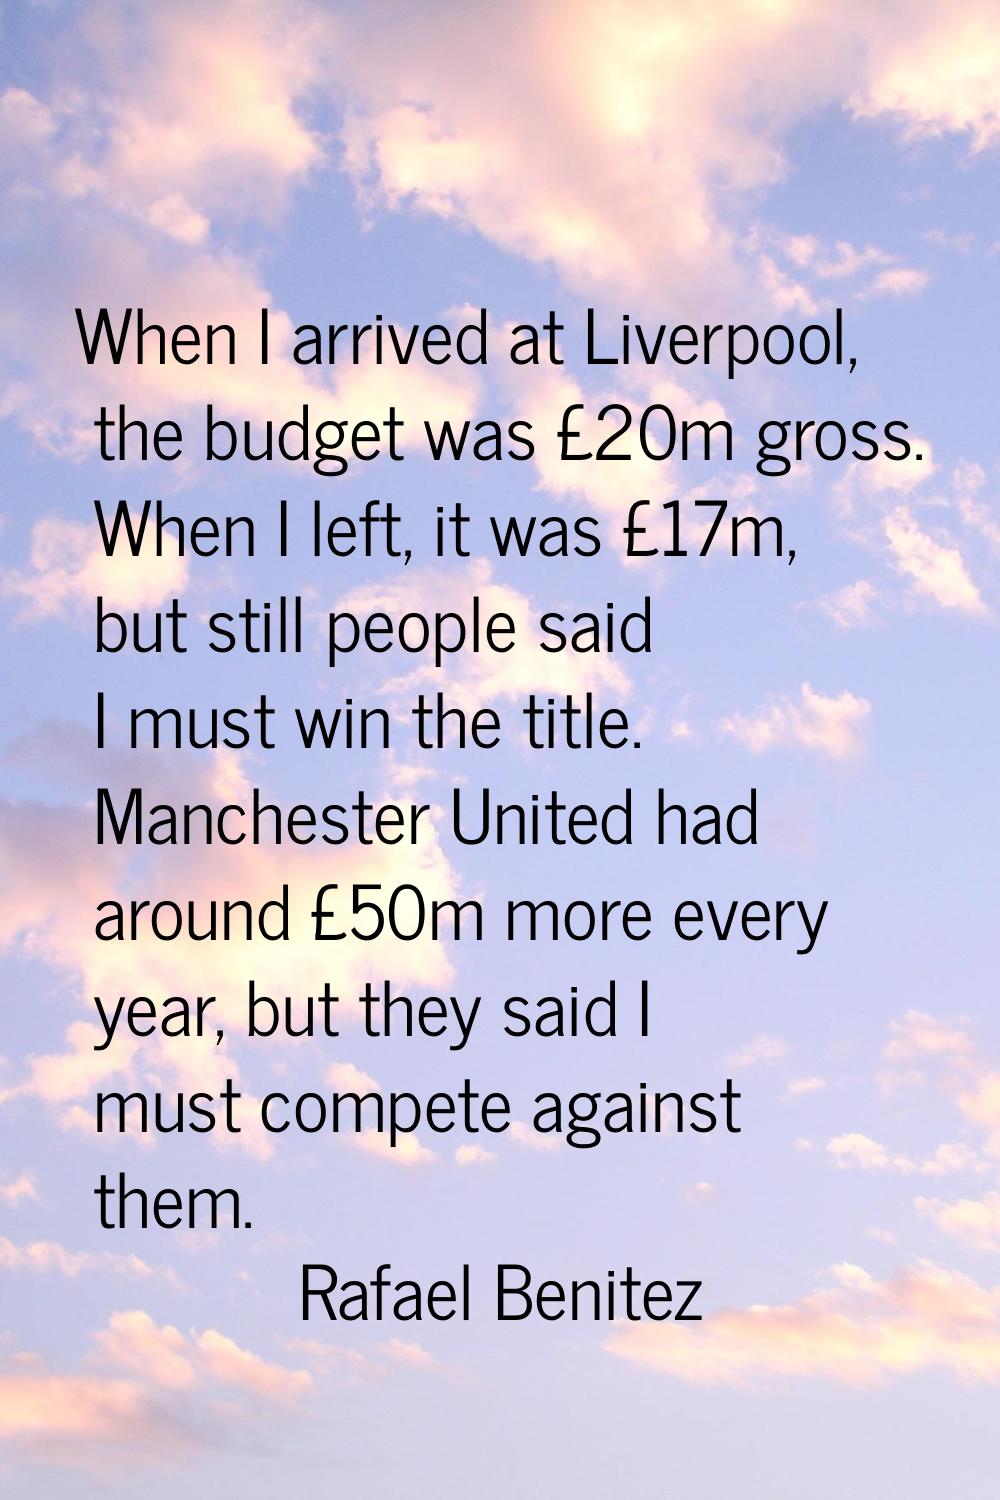 When I arrived at Liverpool, the budget was £20m gross. When I left, it was £17m, but still people 